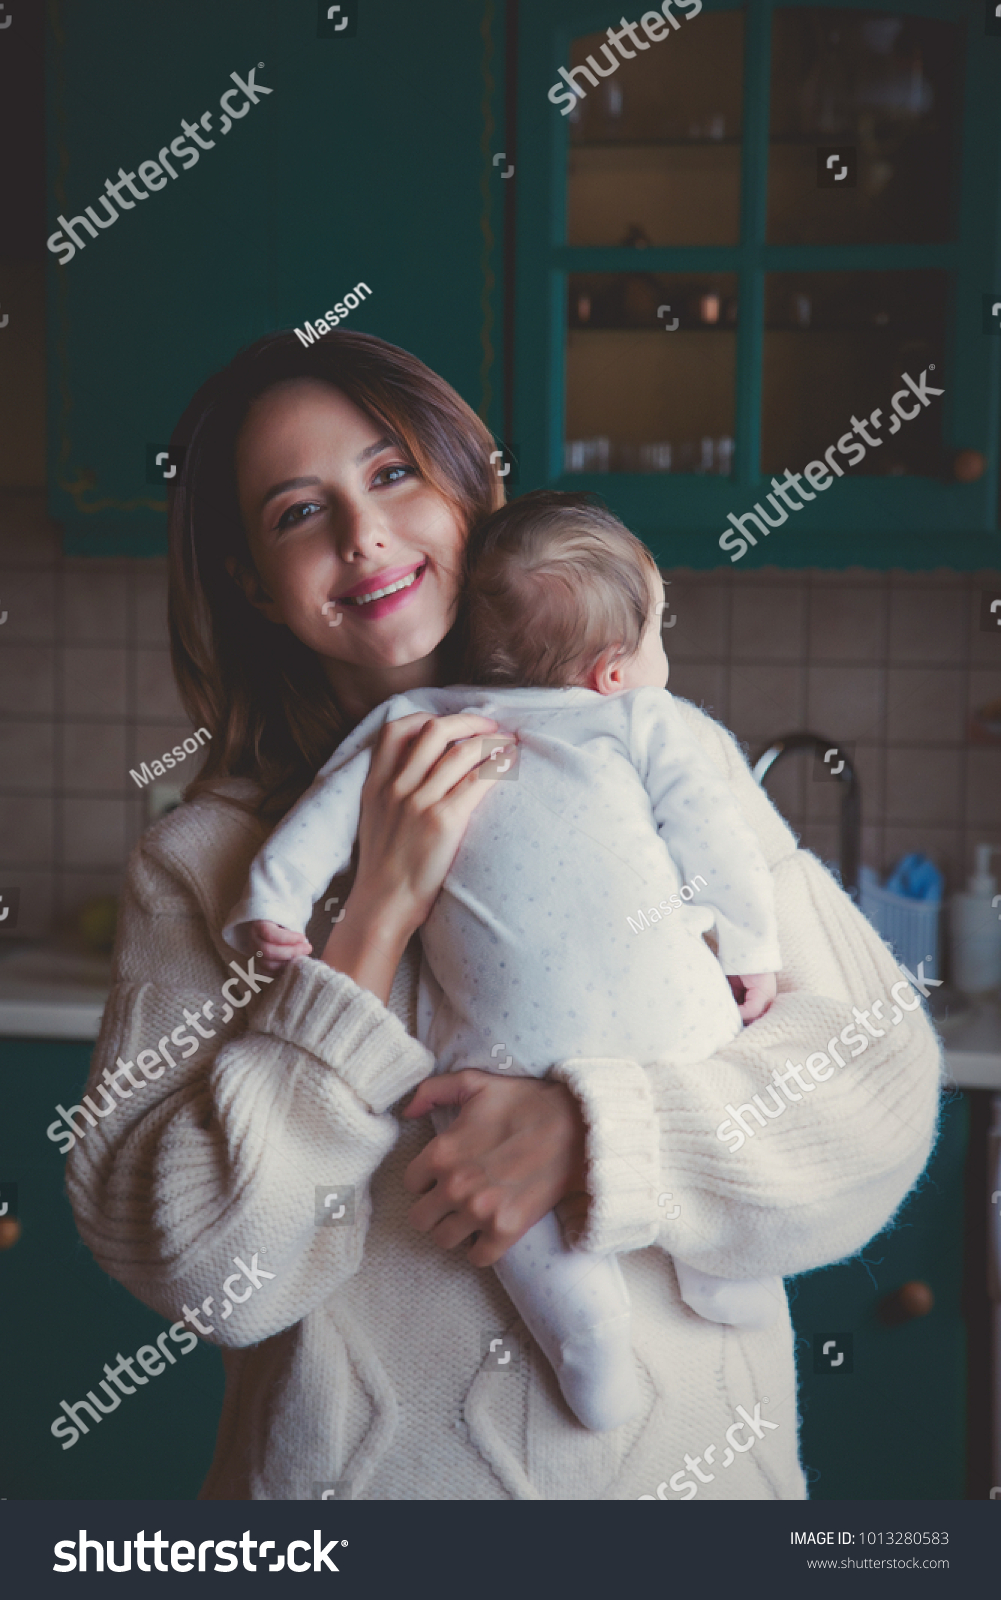 Young mother in sweater holding child indoor at kitchen.  #1013280583